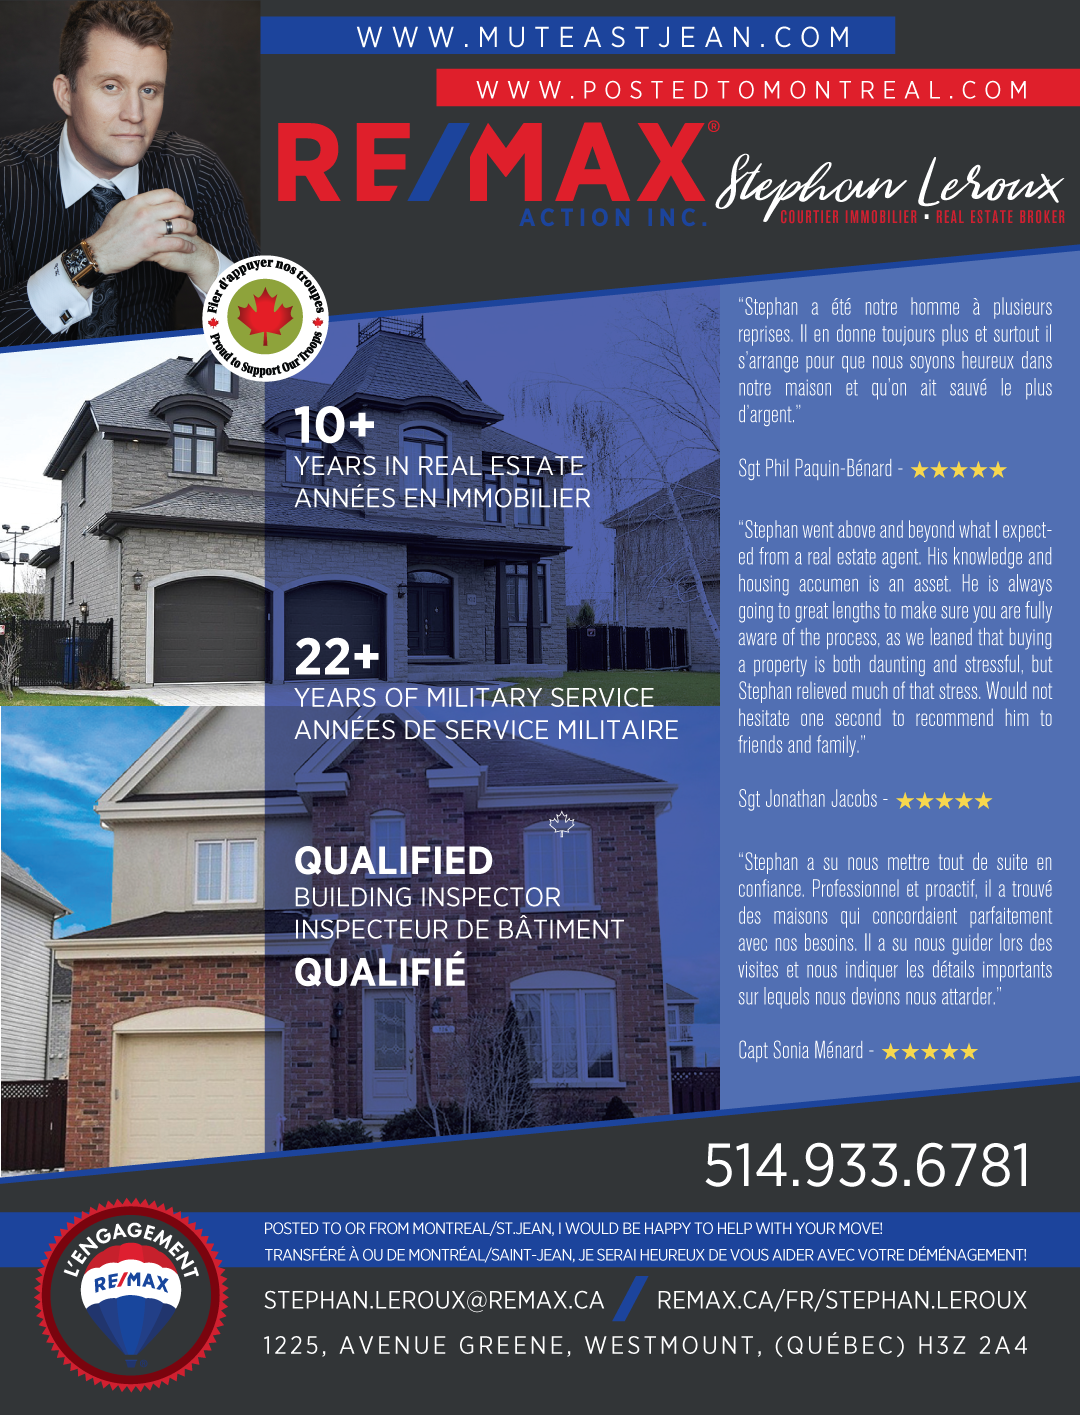 RE/MAX : Stephan Leroux 1225 Ave Greene, Westmount Quebec H3Z 2A4